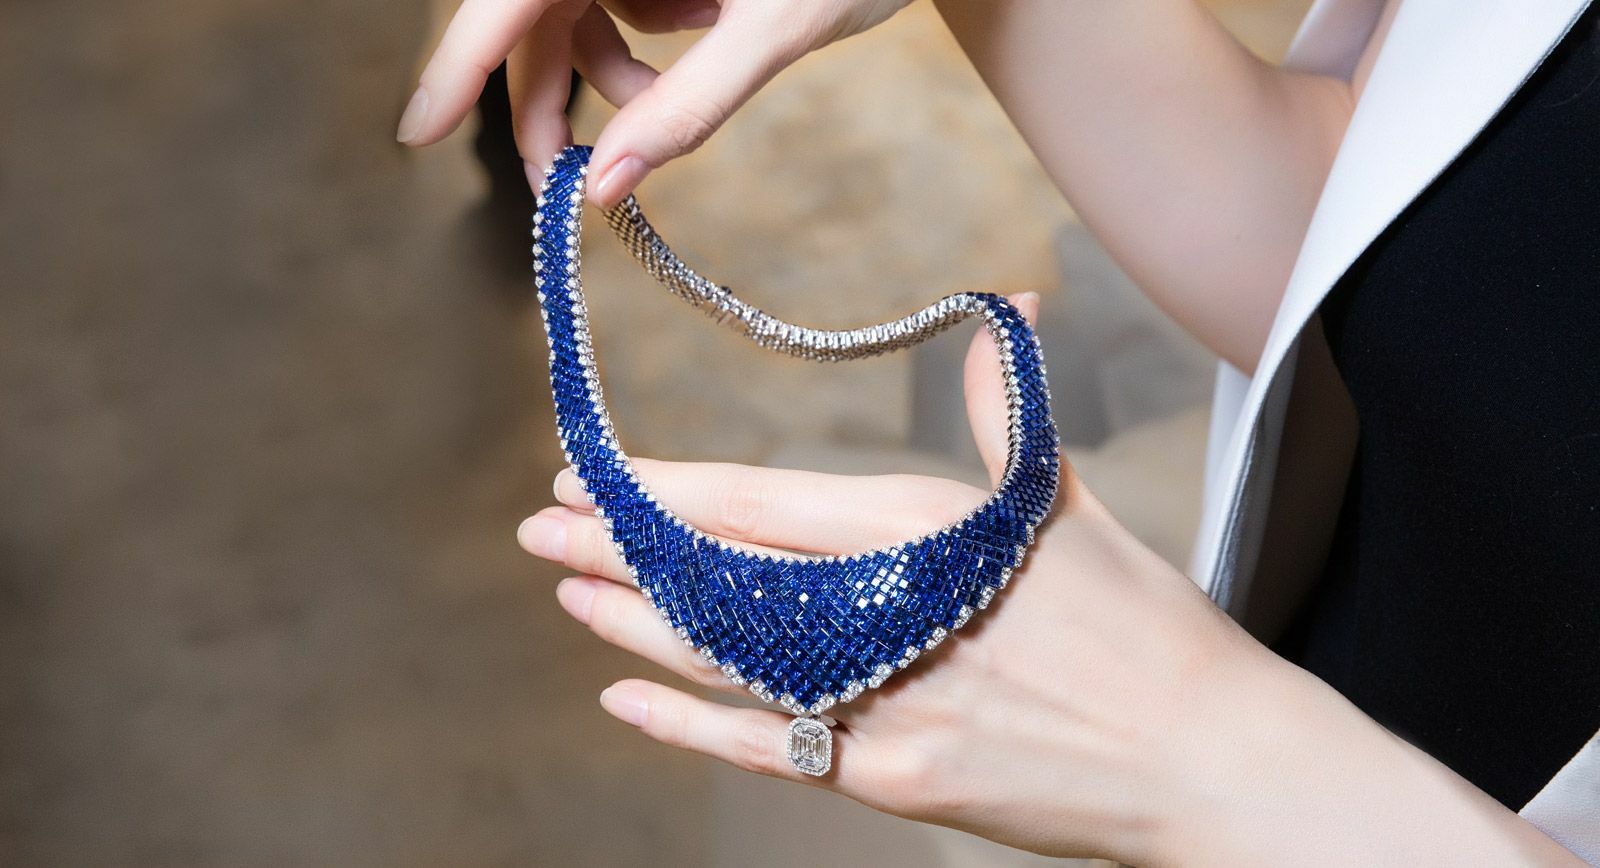 Ovidio necklace by Stenzhorn made in sapphires and diamonds with a Muse diamond drop